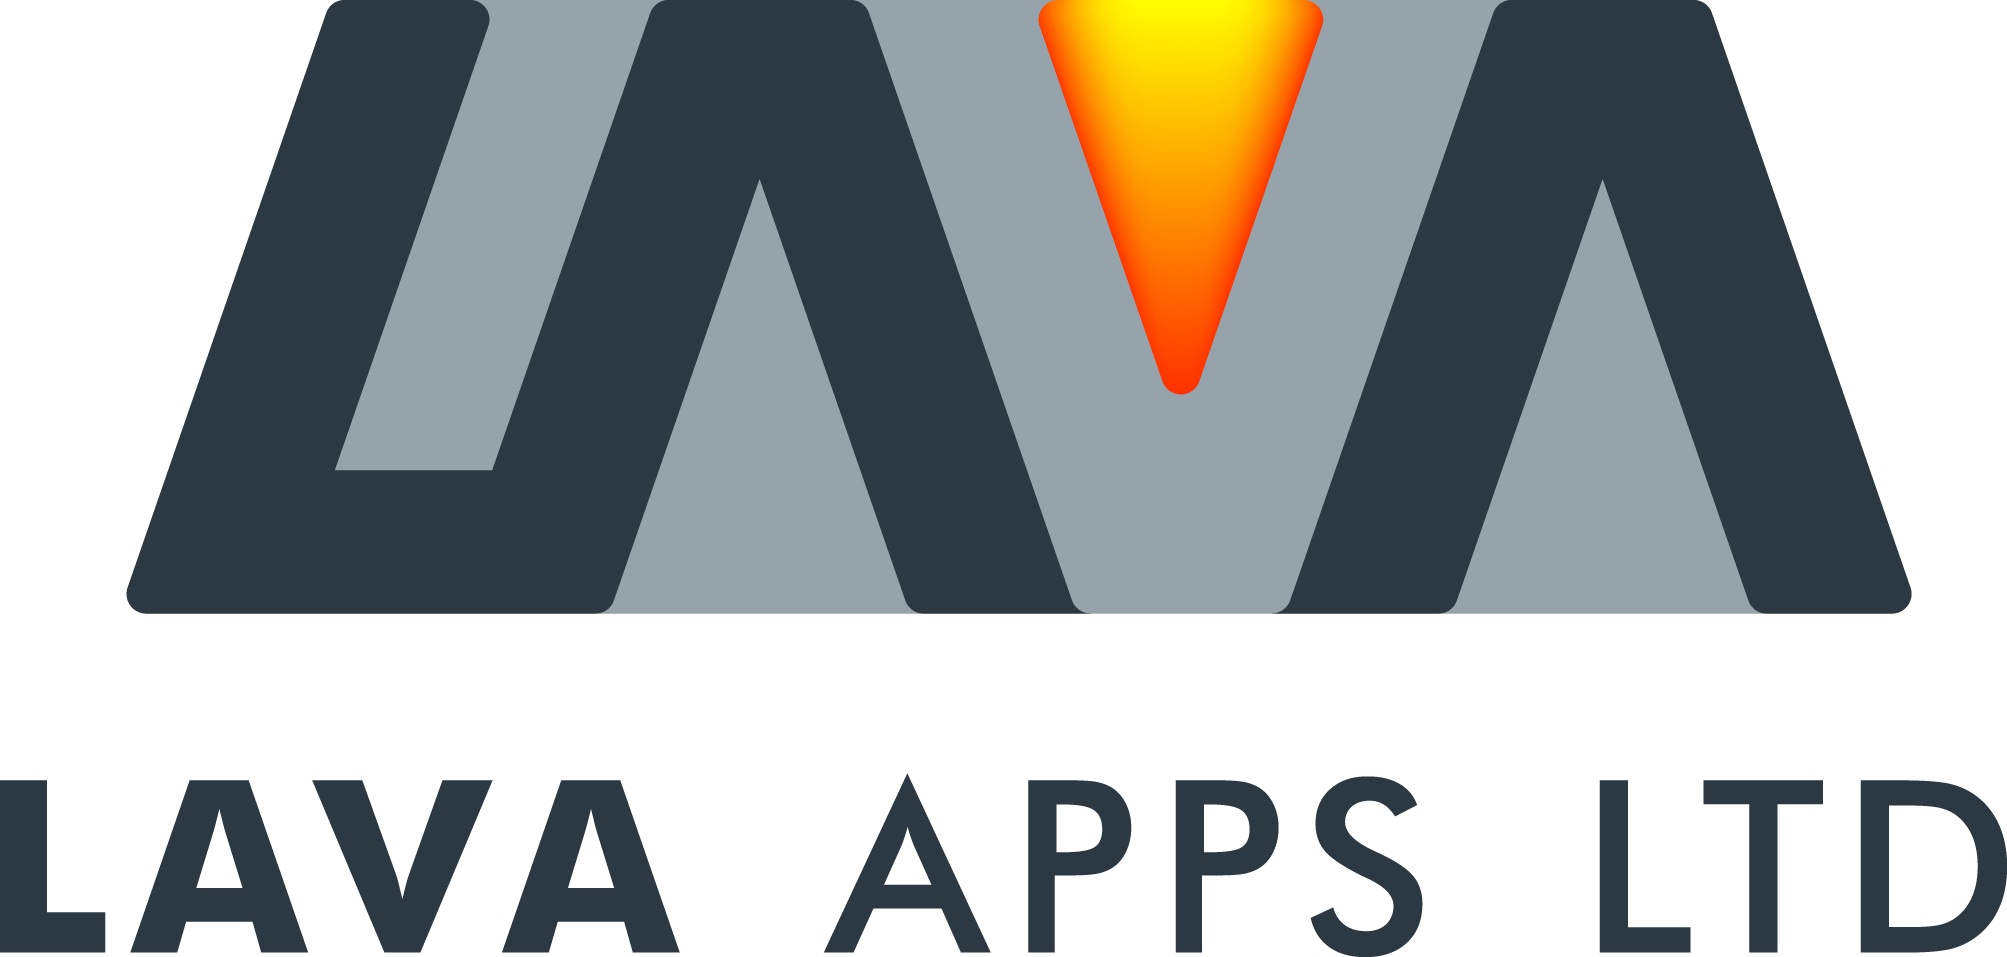 The logo of Lava Apps